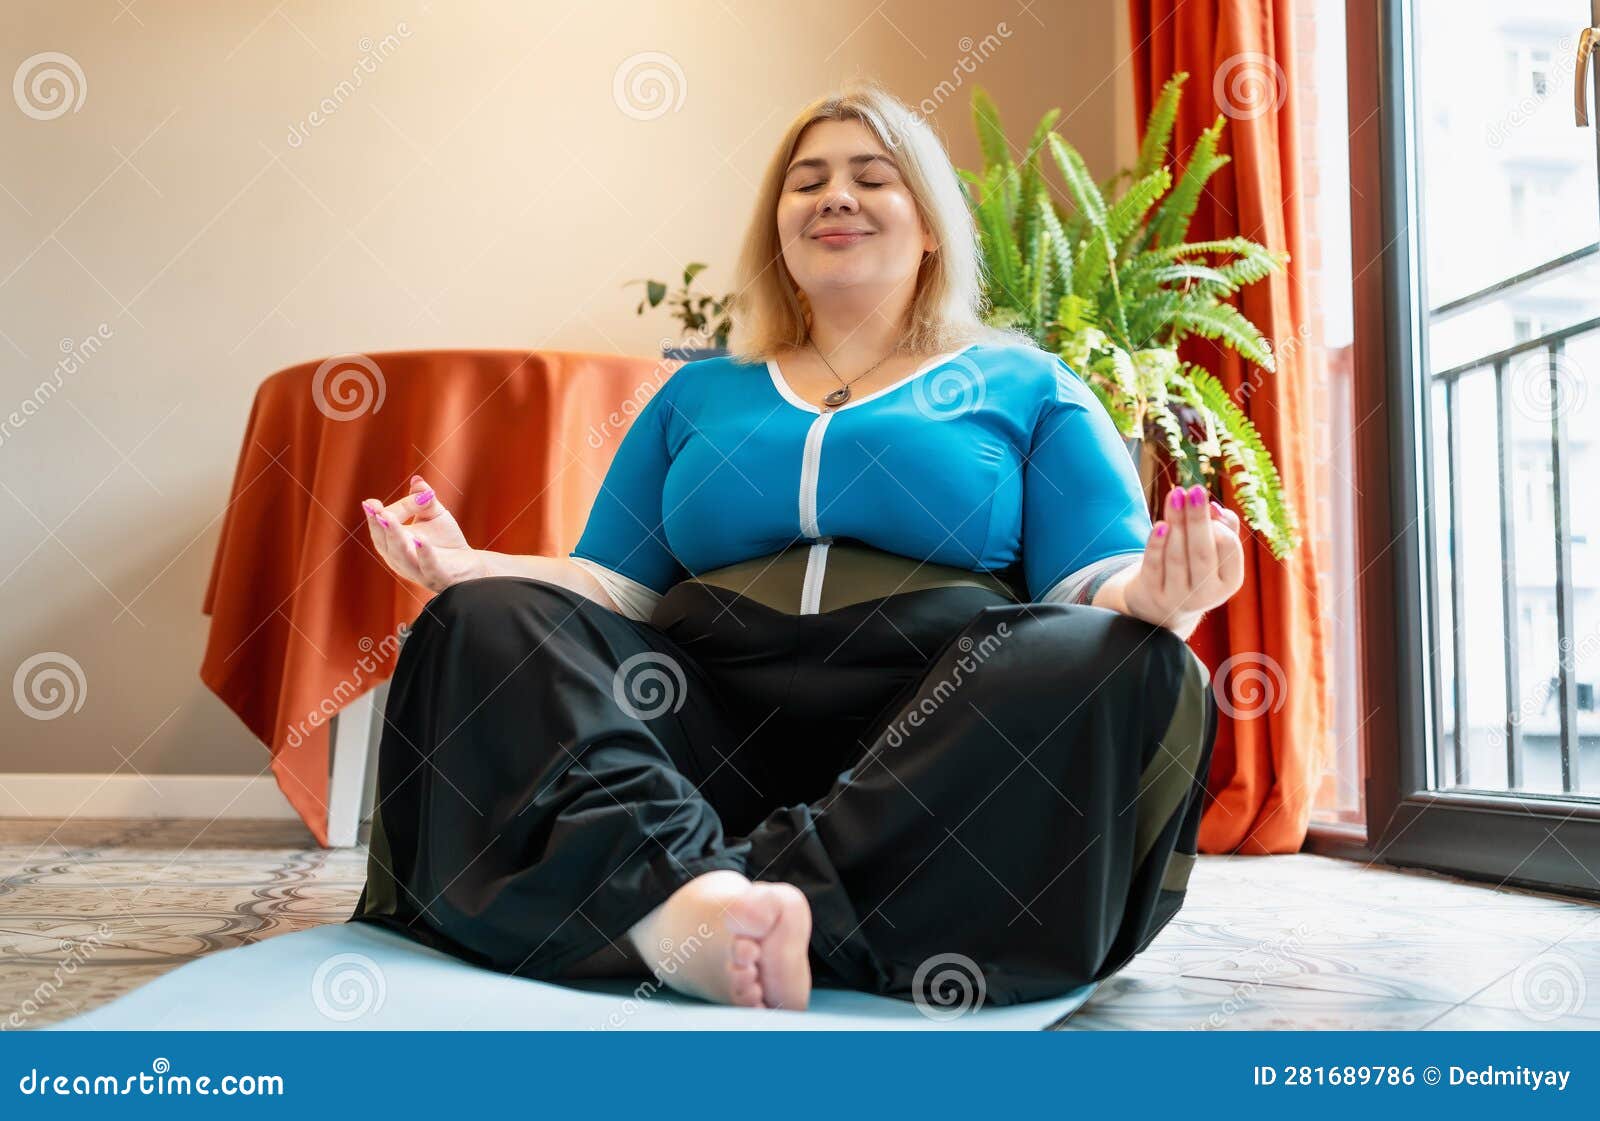 Plus Size Curvy Woman In Yoga Positions Set, Plump Girl Practicing